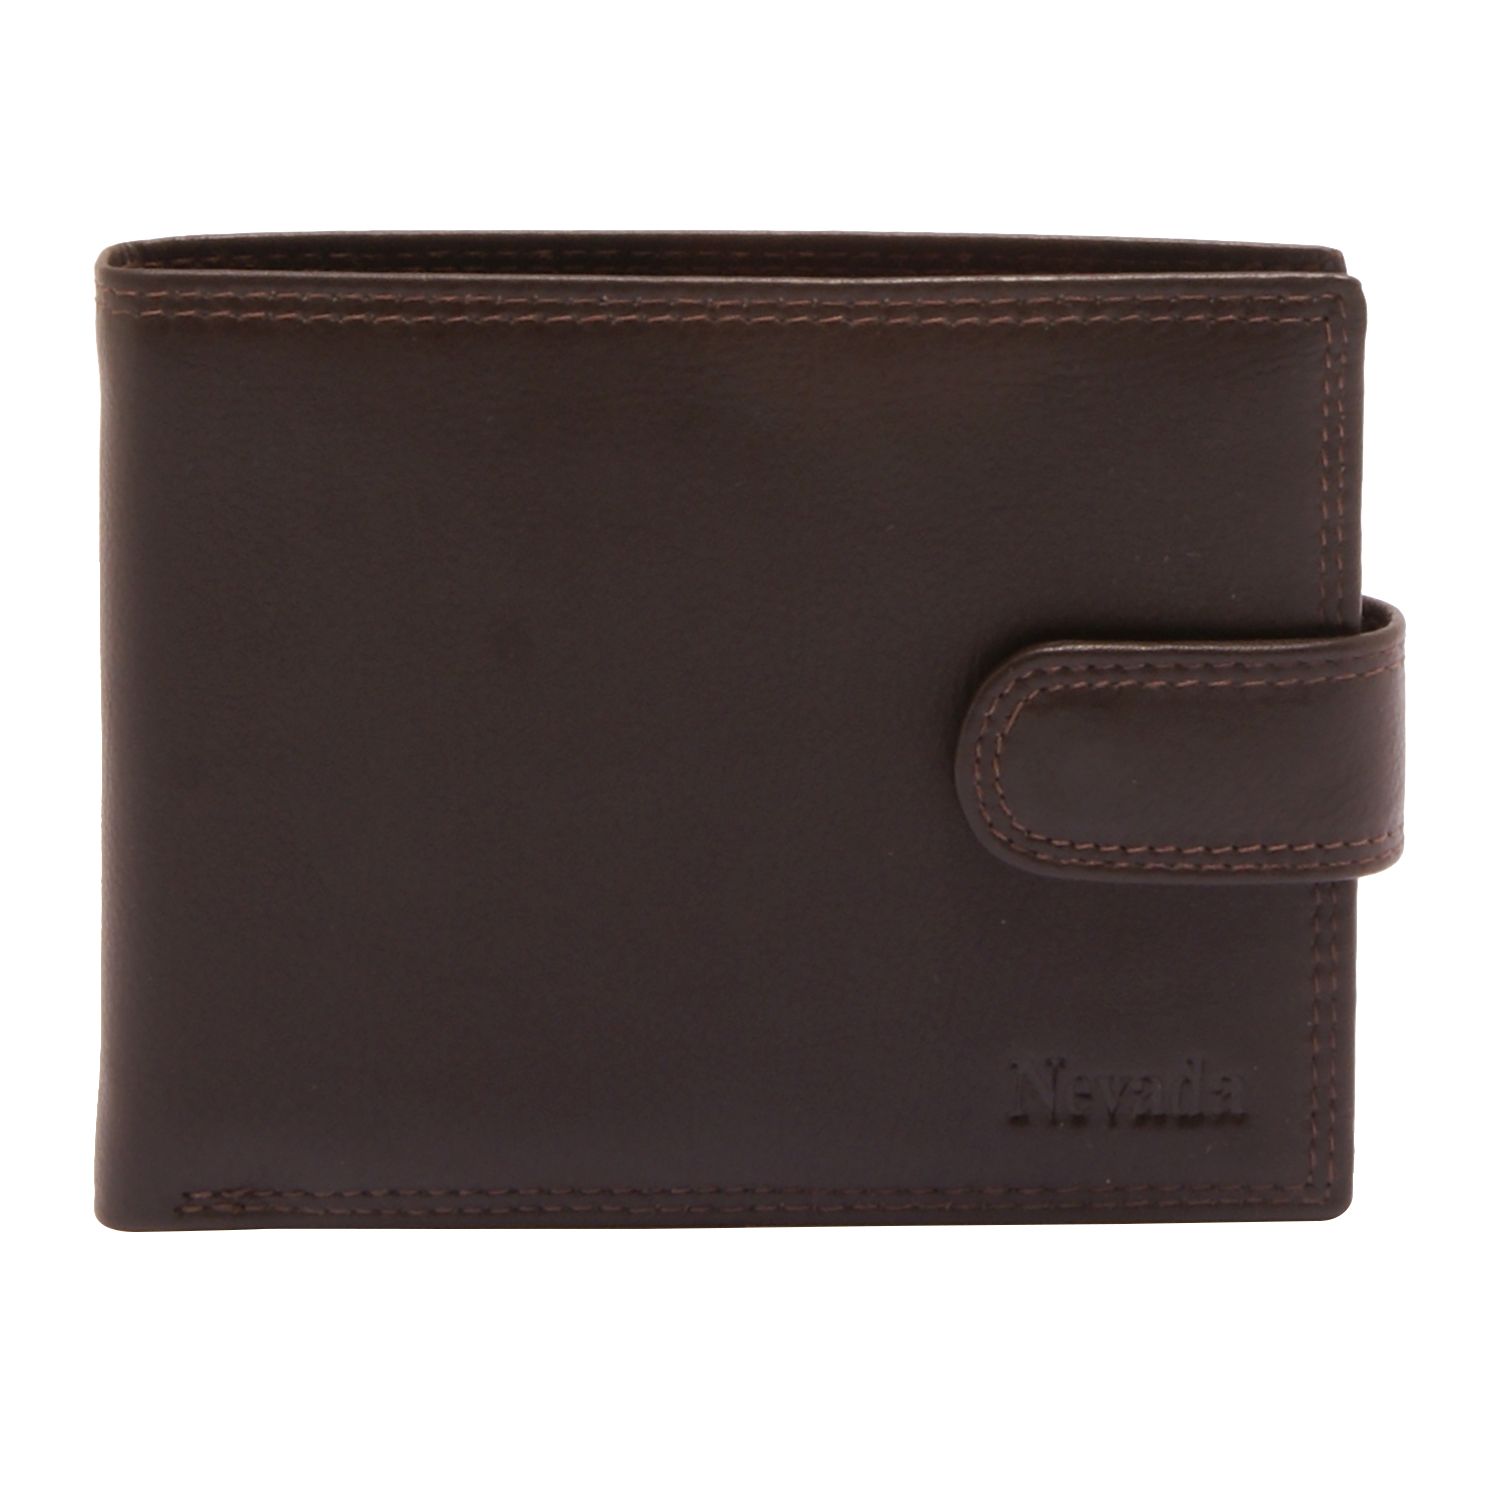 Hansson - Brown Leather Nevada Billfold Wallet with Coin Purse and Tab ...